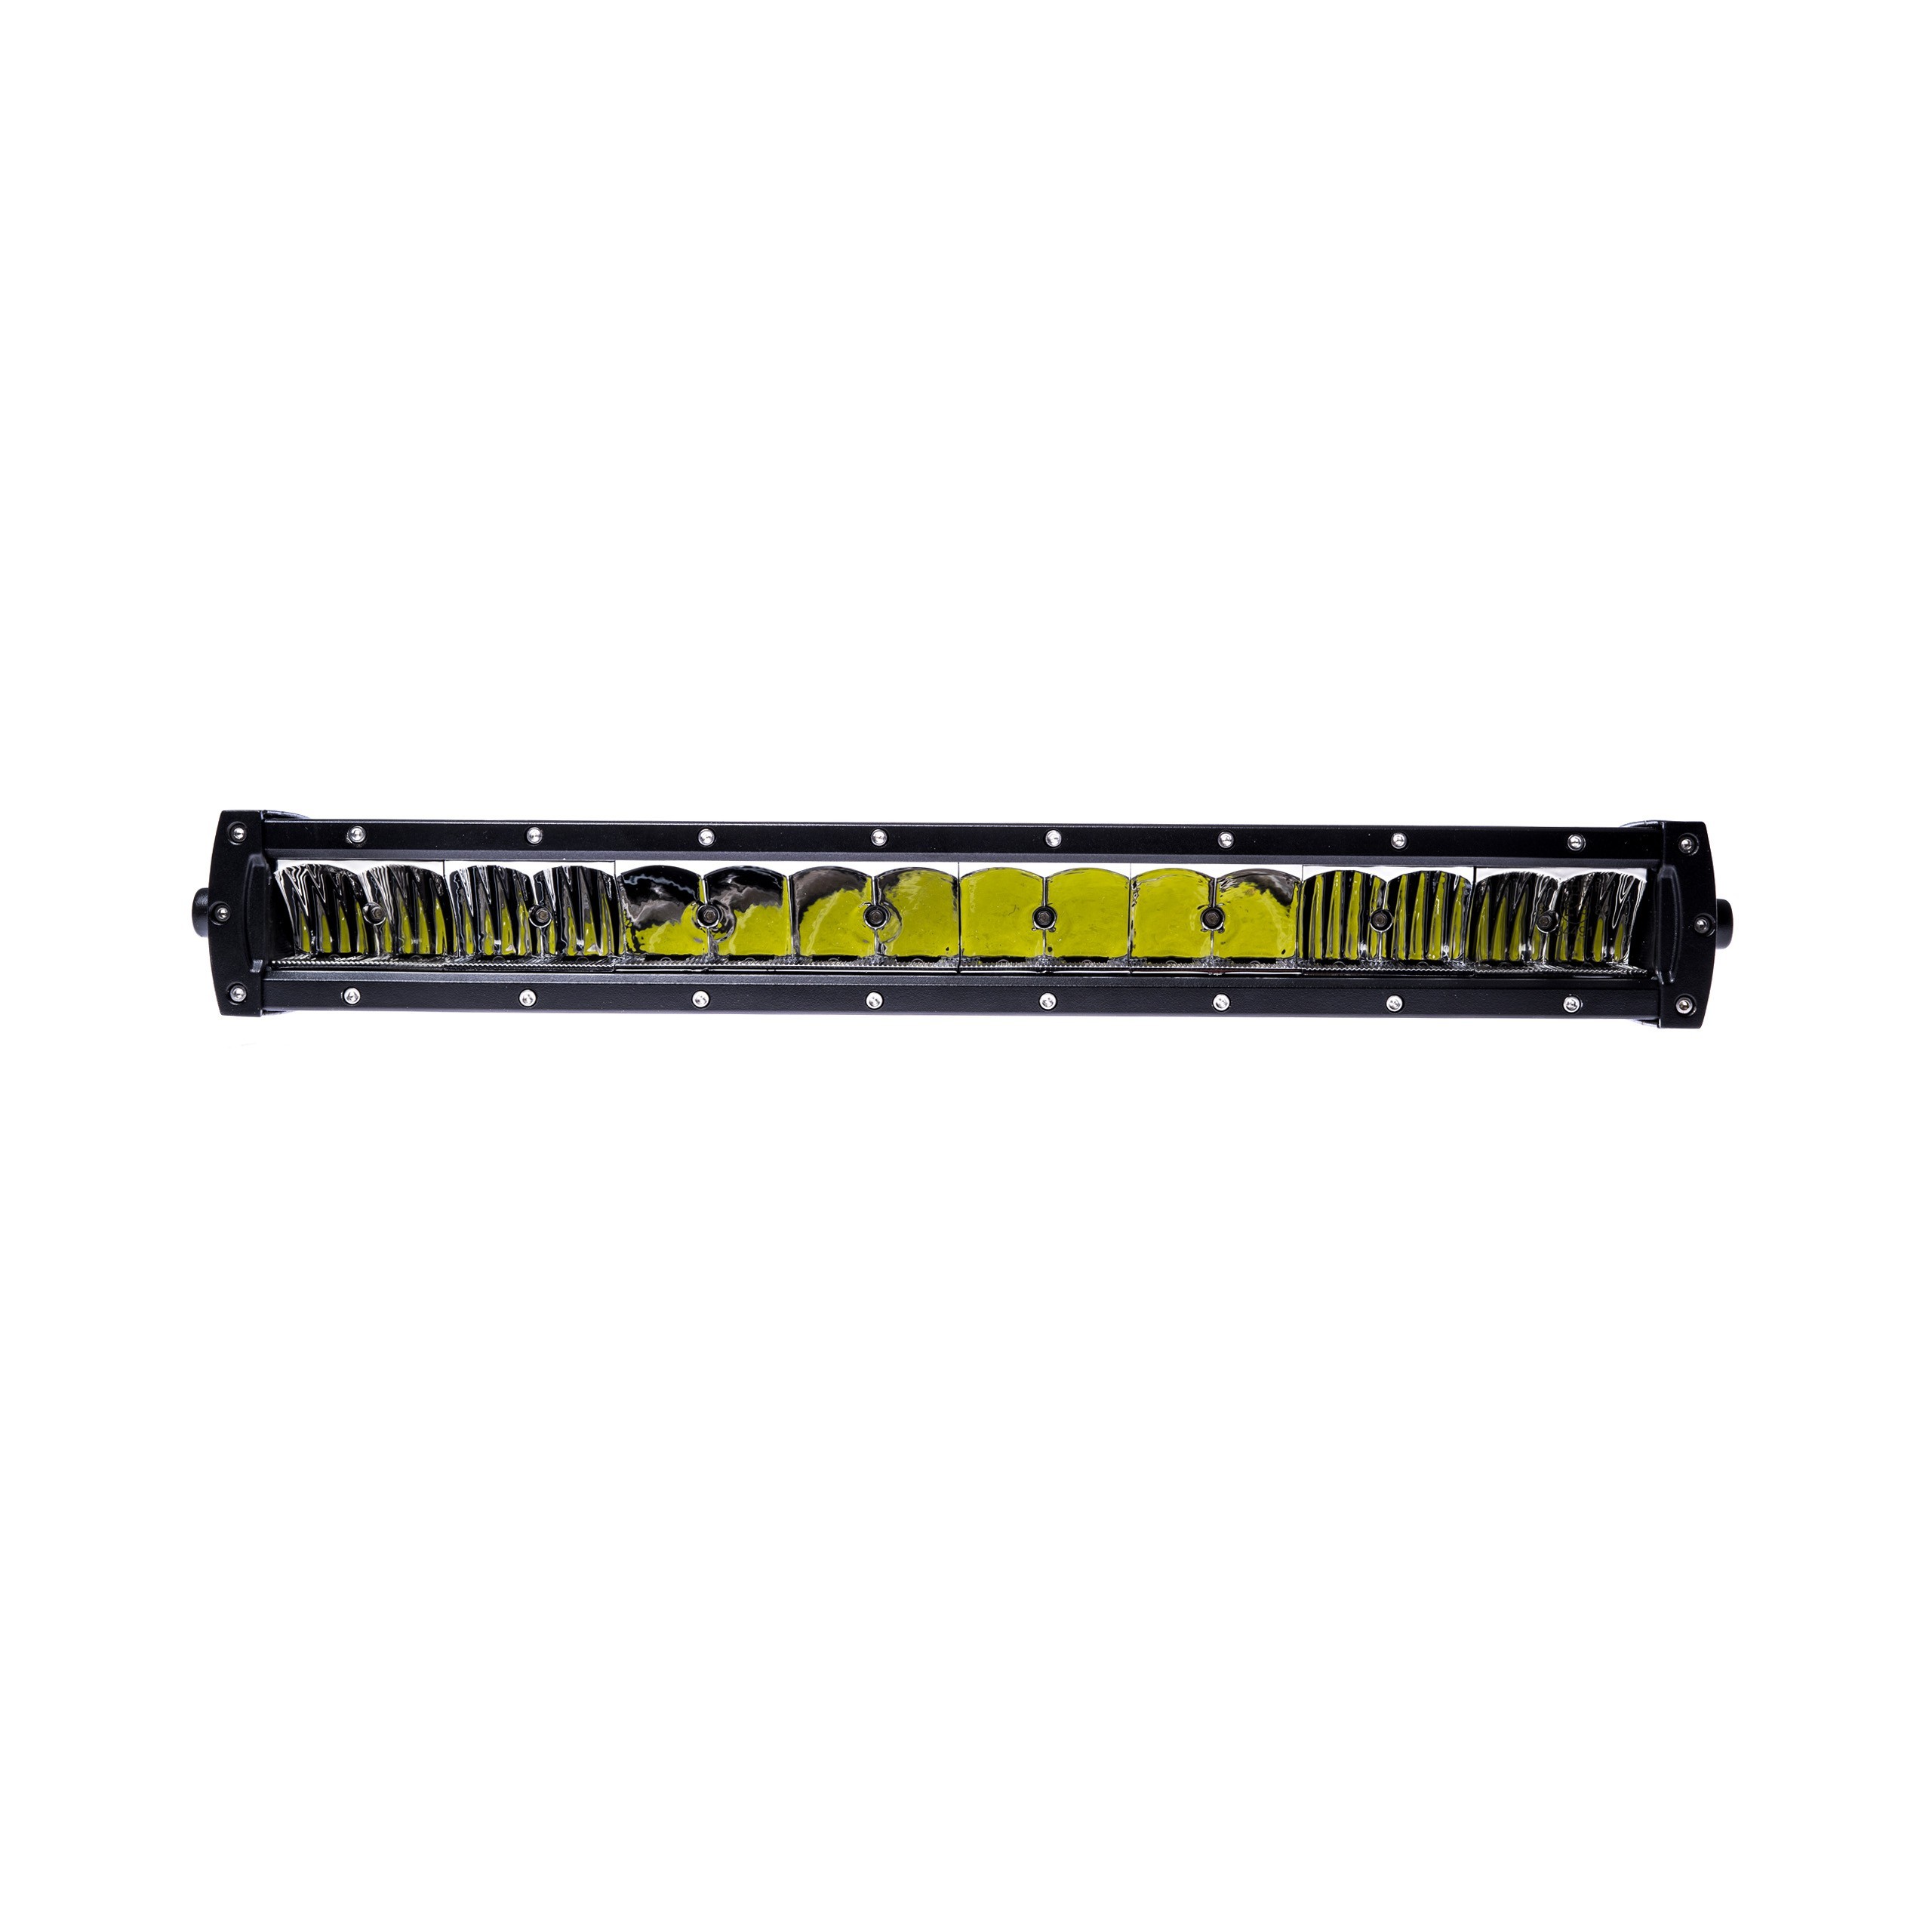 EPWLD03 LED DRIVING LIGHT 160W CREE COMBO WITH APPROVAL